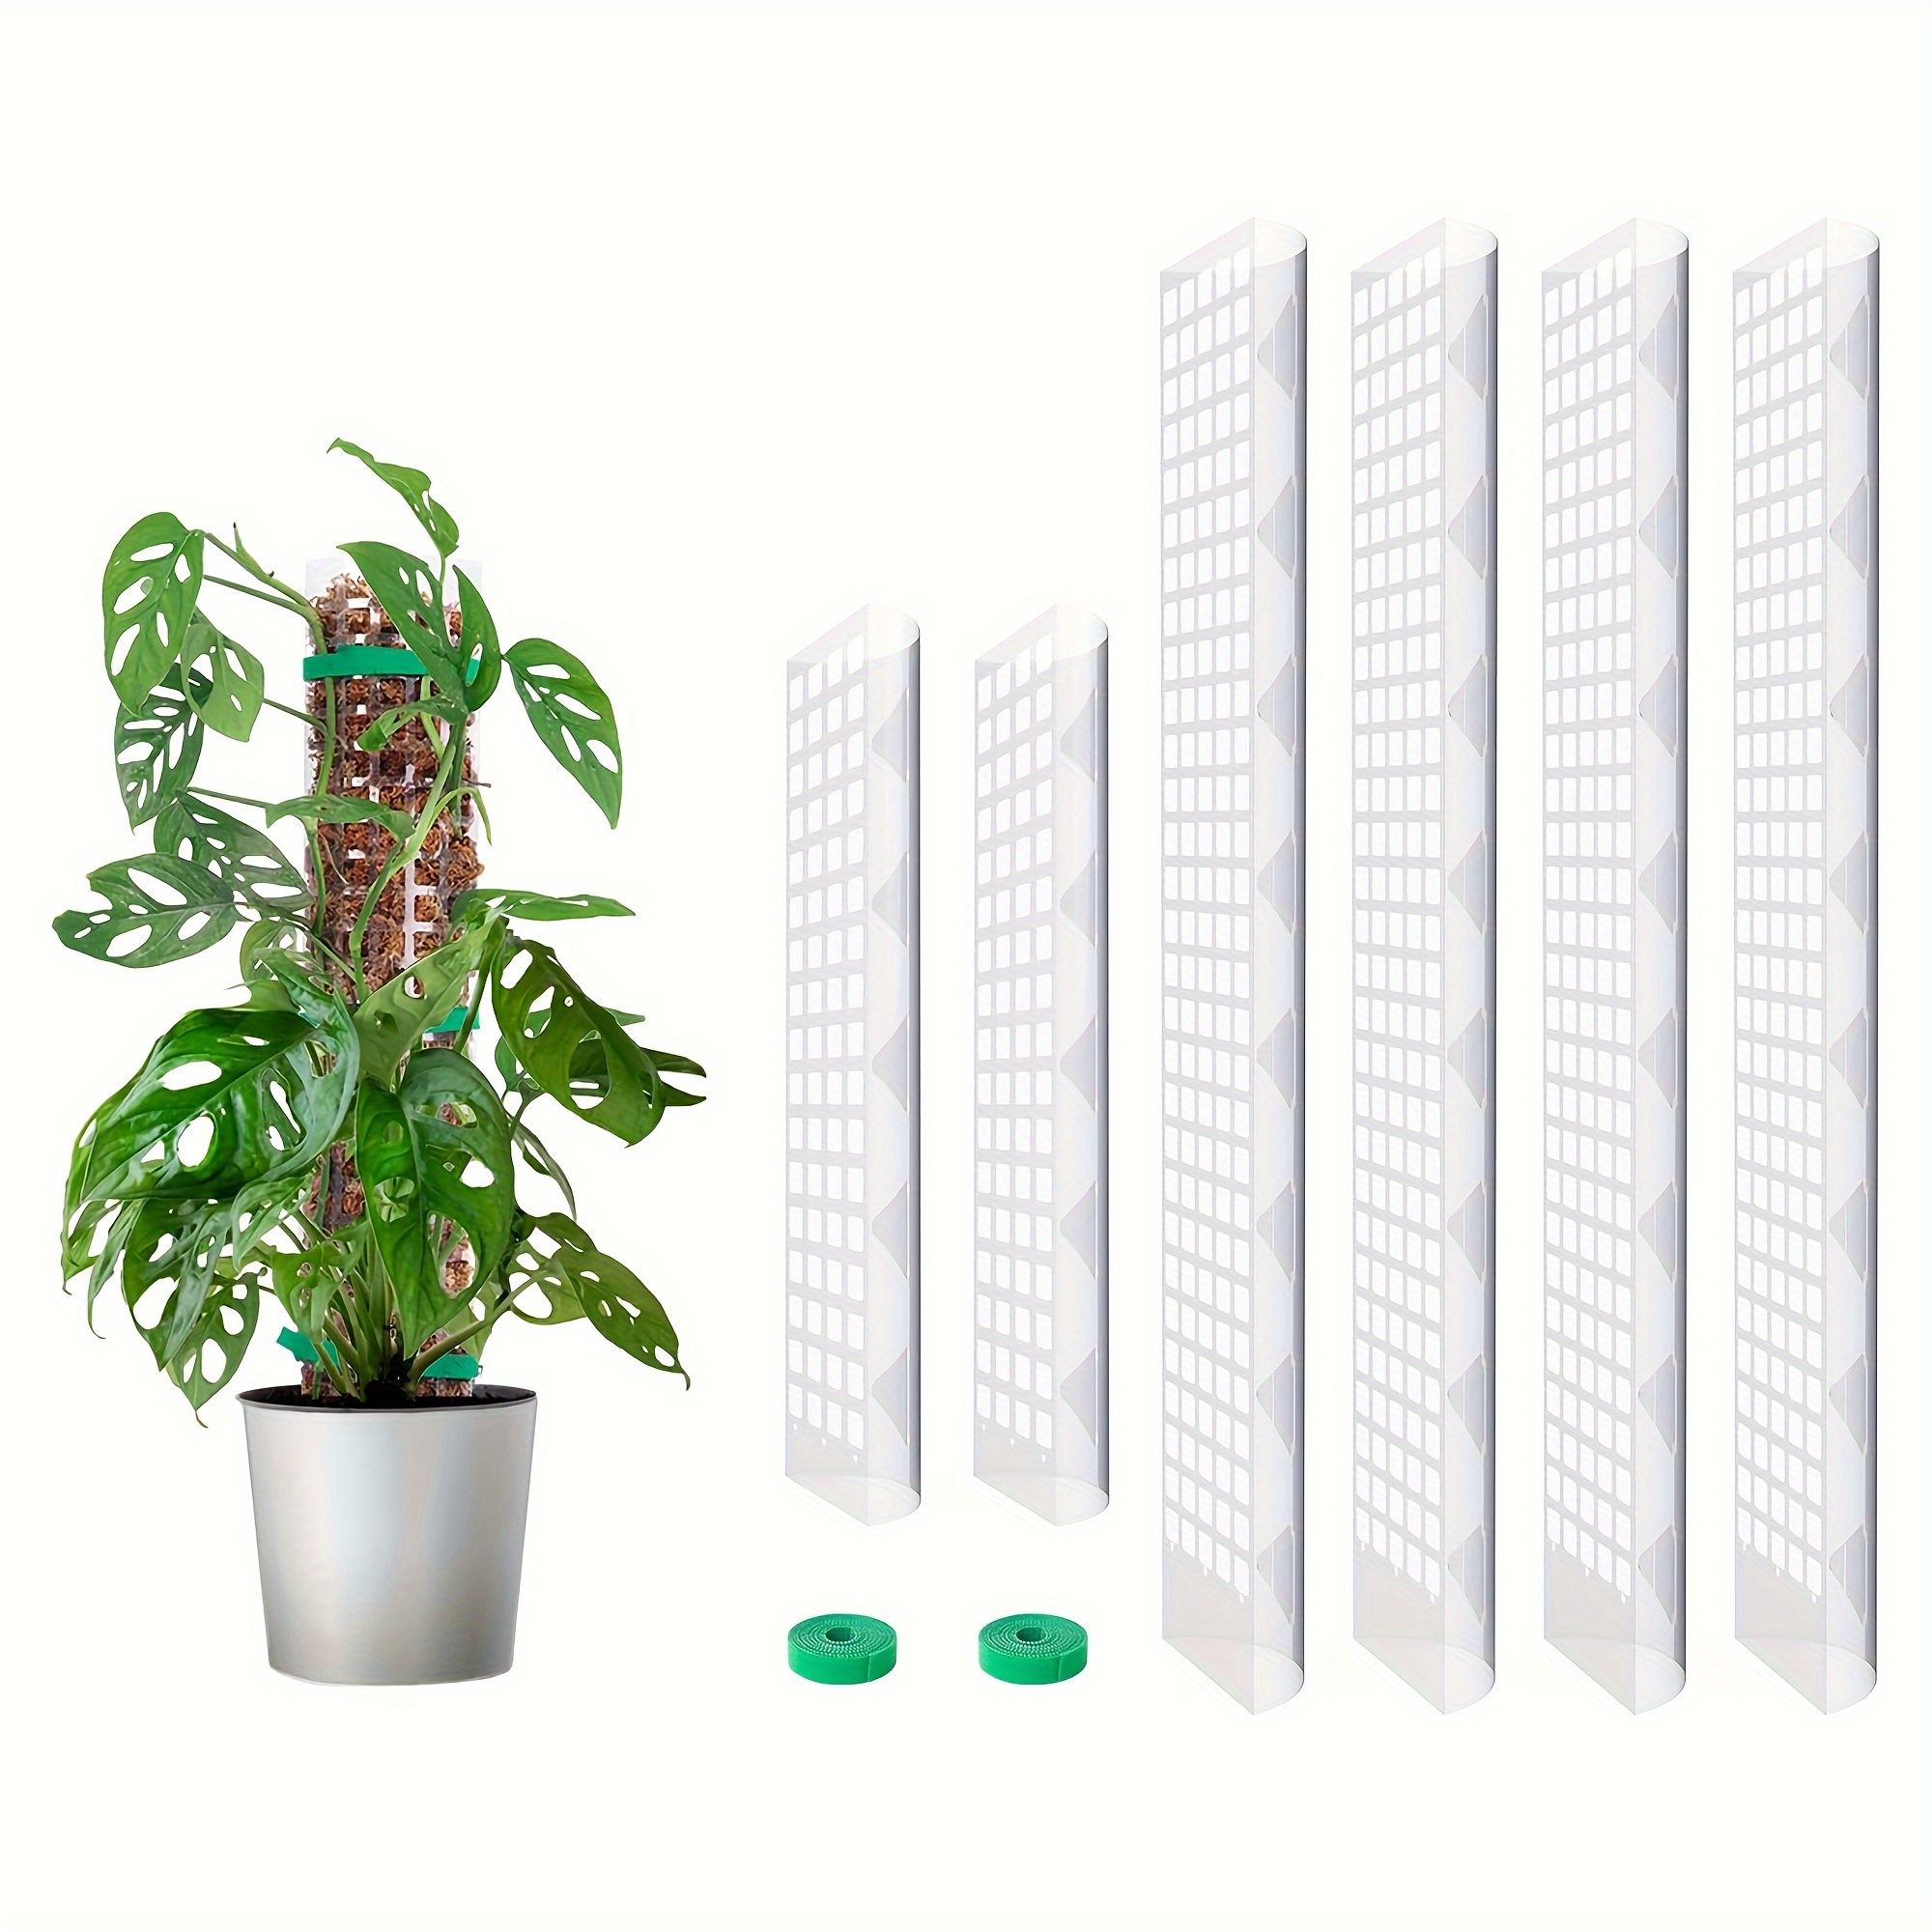 

6-pack Transparent Pet Climbing Plant Support - 4 Extendable 24" Moss Poles & 2 Stackable 15" Stakes For Indoor Potted Plants, Adjustable Monstera Growing Trellis With Expandable Design